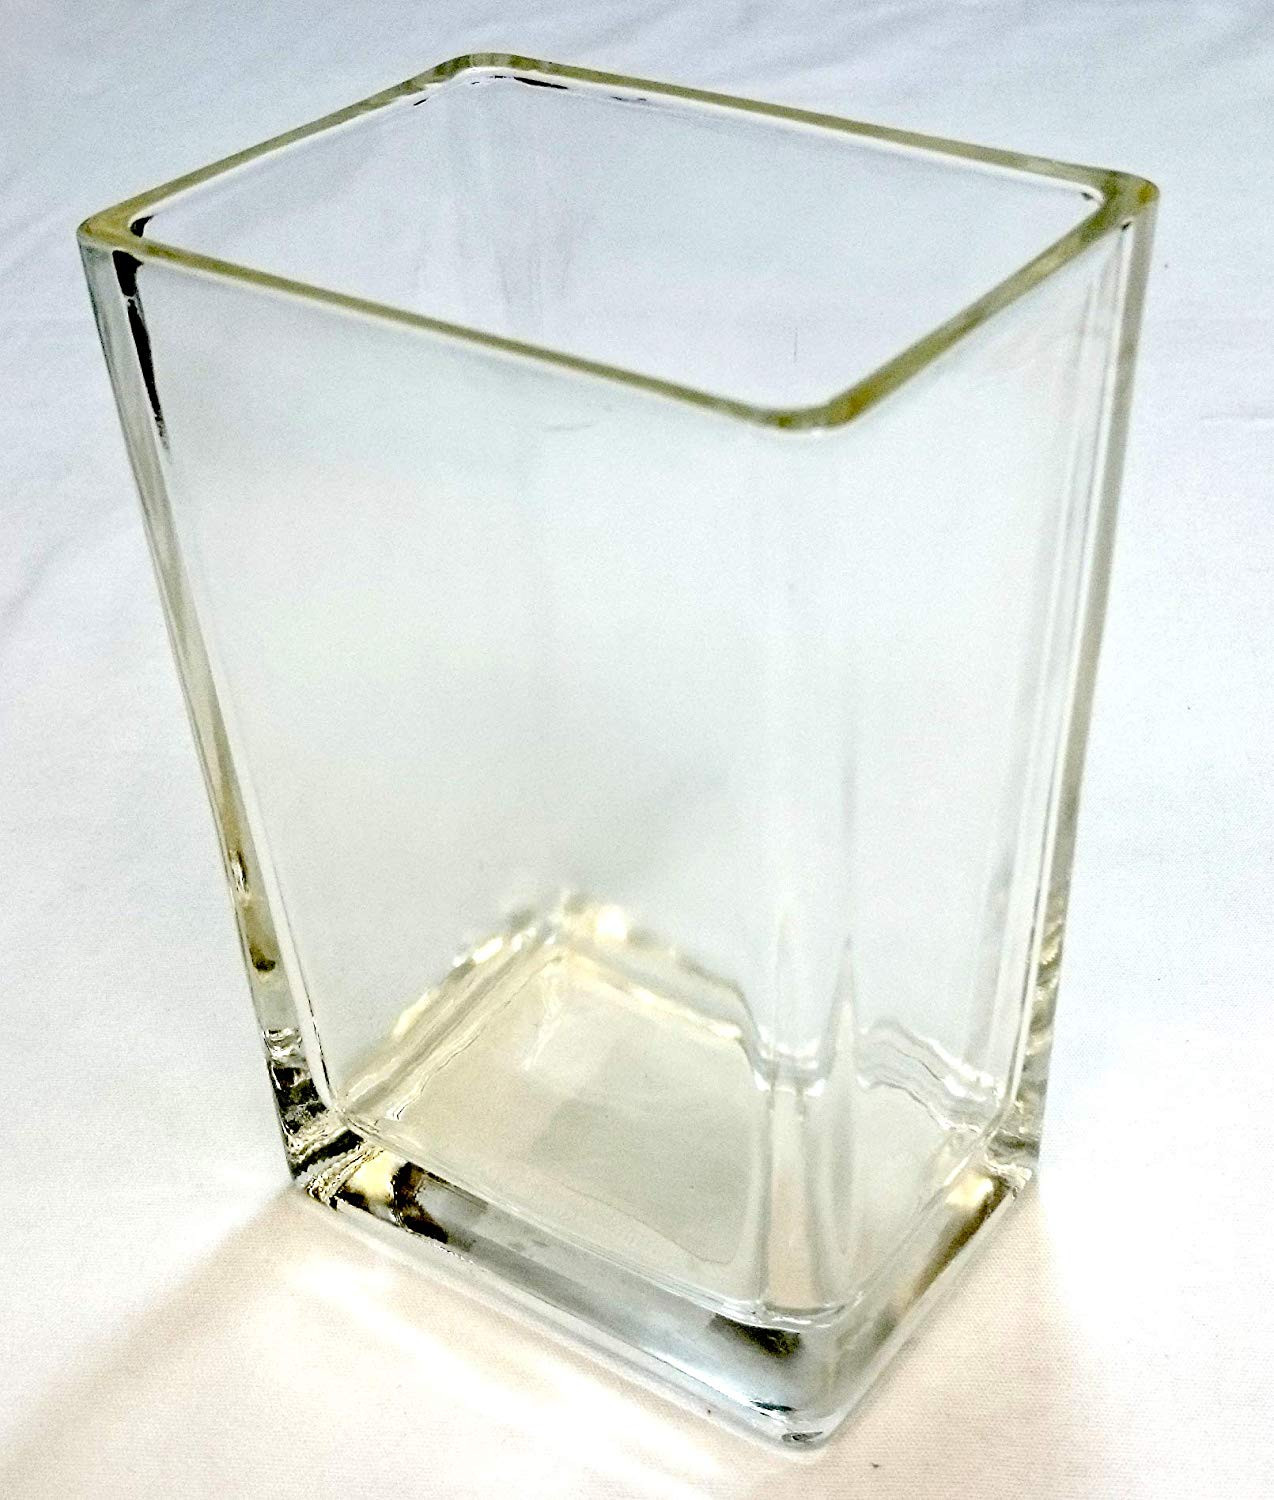 13 Stunning 6 X 6 Glass Cube Vases 2024 free download 6 x 6 glass cube vases of amazon com concord global trading 6 rectangle 3x4 base glass vase throughout amazon com concord global trading 6 rectangle 3x4 base glass vase six inch high tapered